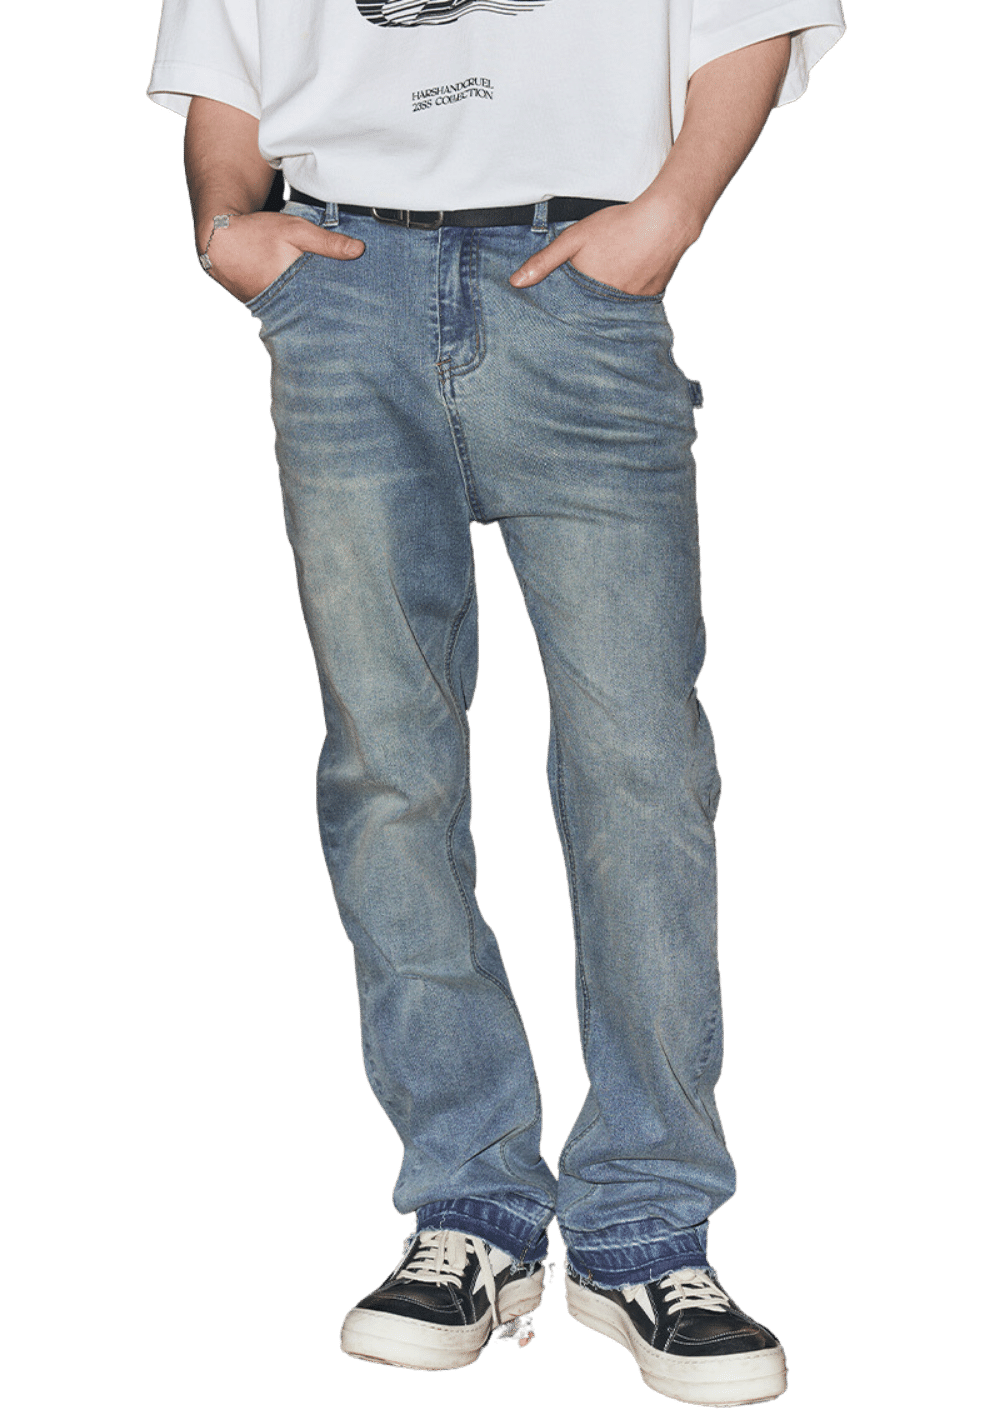 Distressed Vintage Washed Flared Jeans - PSYLOS 1, Distressed Vintage Washed Flared Jeans, Pants, HARSH AND CRUEL, PSYLOS 1